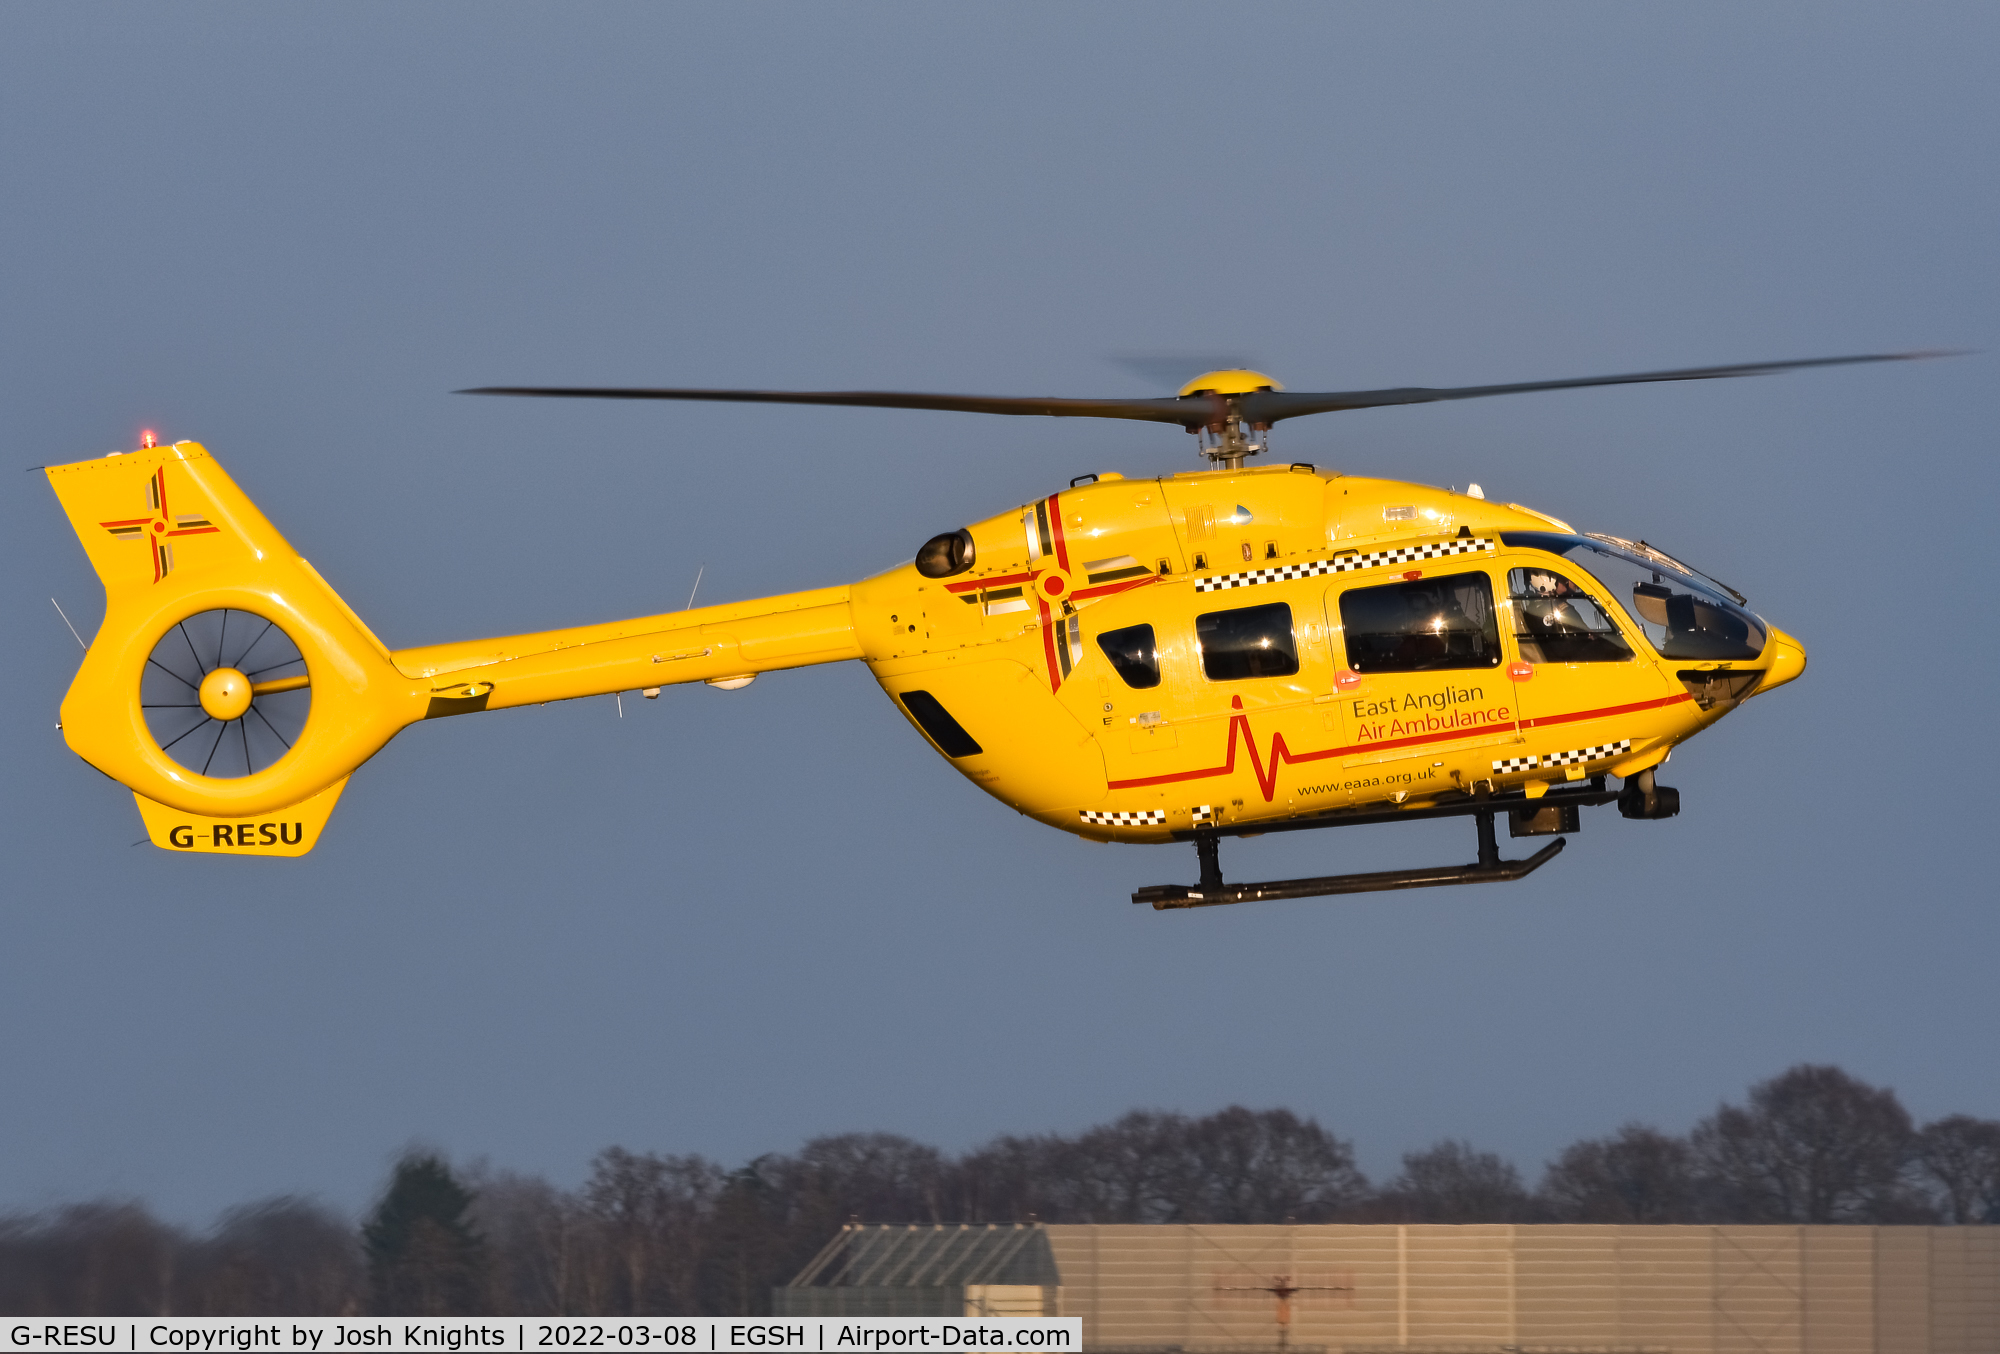 Aircraft G RESU 2015 Airbus Helicopters EC 145T 2 BK 117D 2 C N 